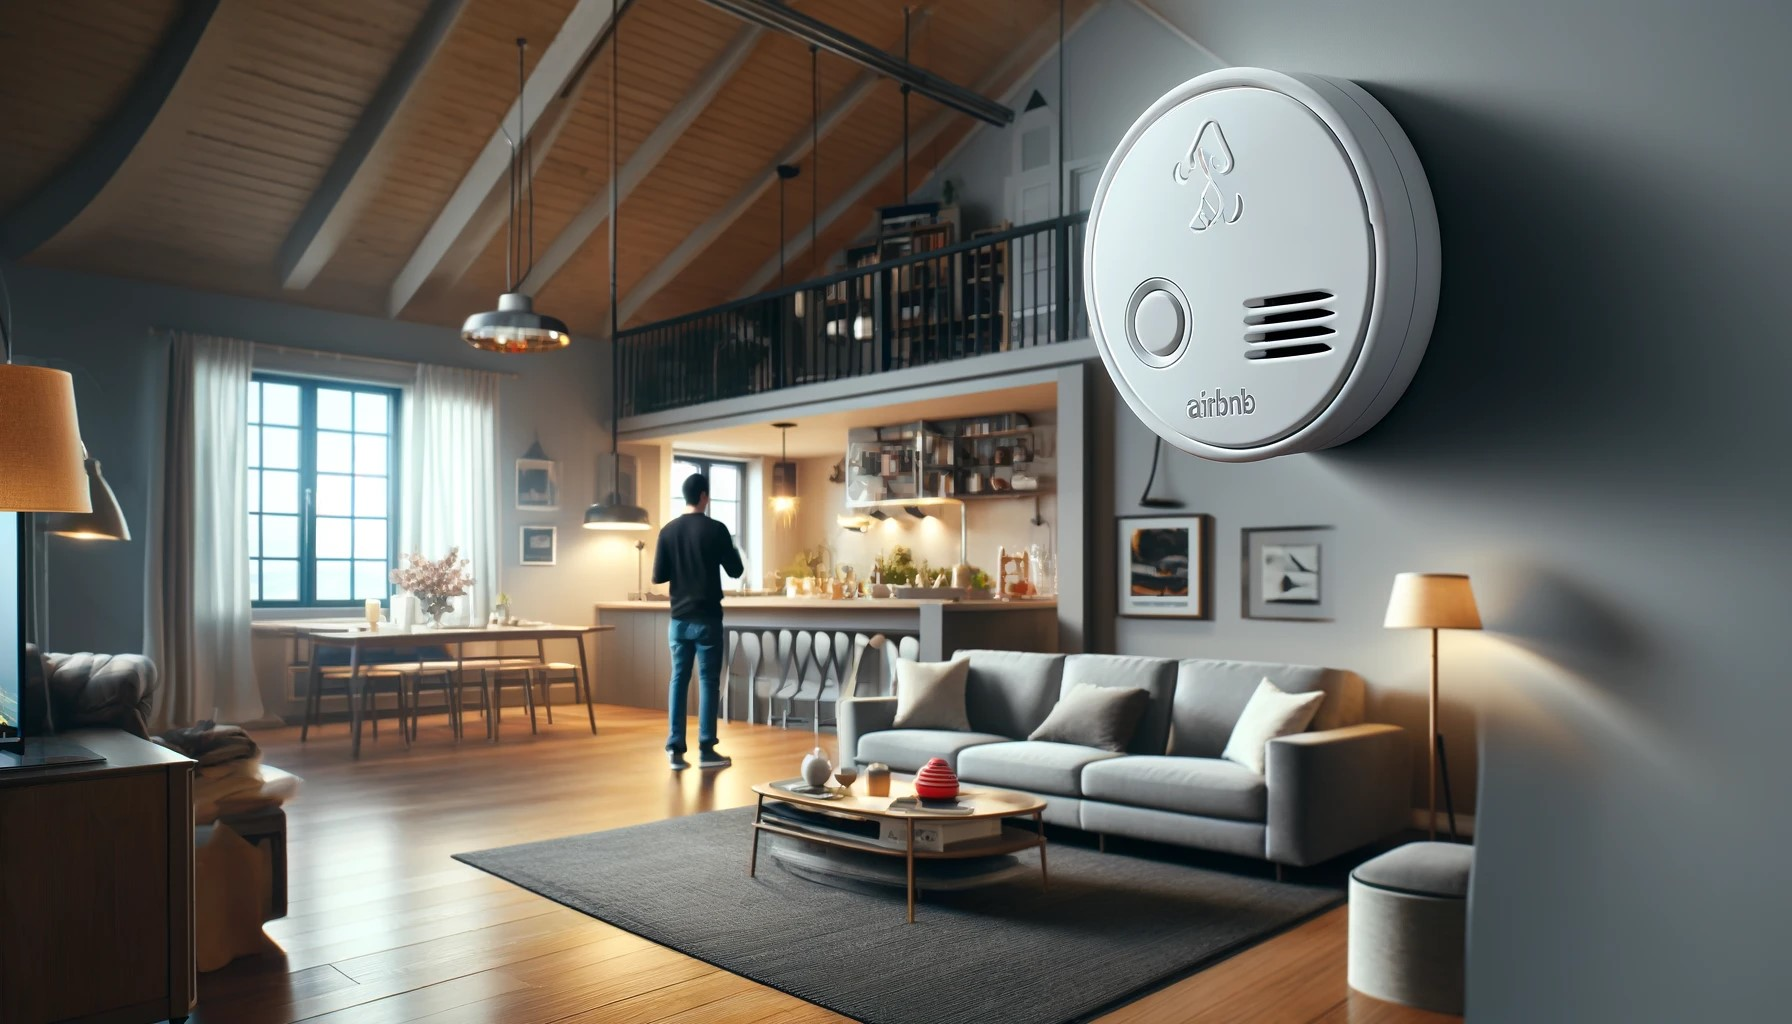 Carbon monoxide and smoke detectors for indoor common spaces